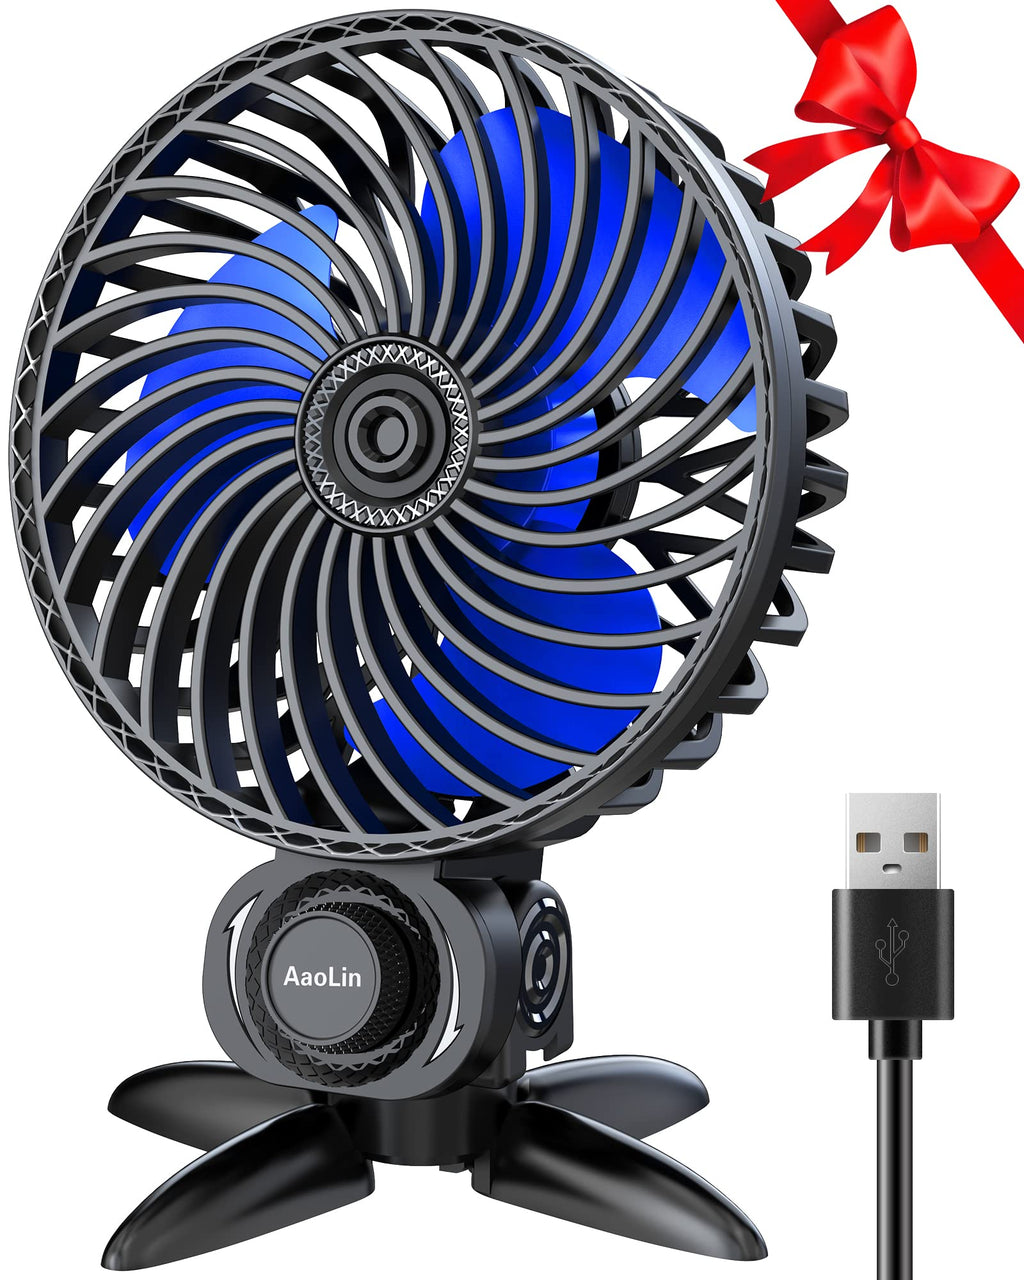 [Australia - AusPower] - AaoLin USB Small Fan, Desk Fans with CVT Variable Speeds, Strong Cooling Airflow, Quiet Portable, Desktop Mini Personal Fan for Room, Home,Office, Bedroom-USB Powered Black 